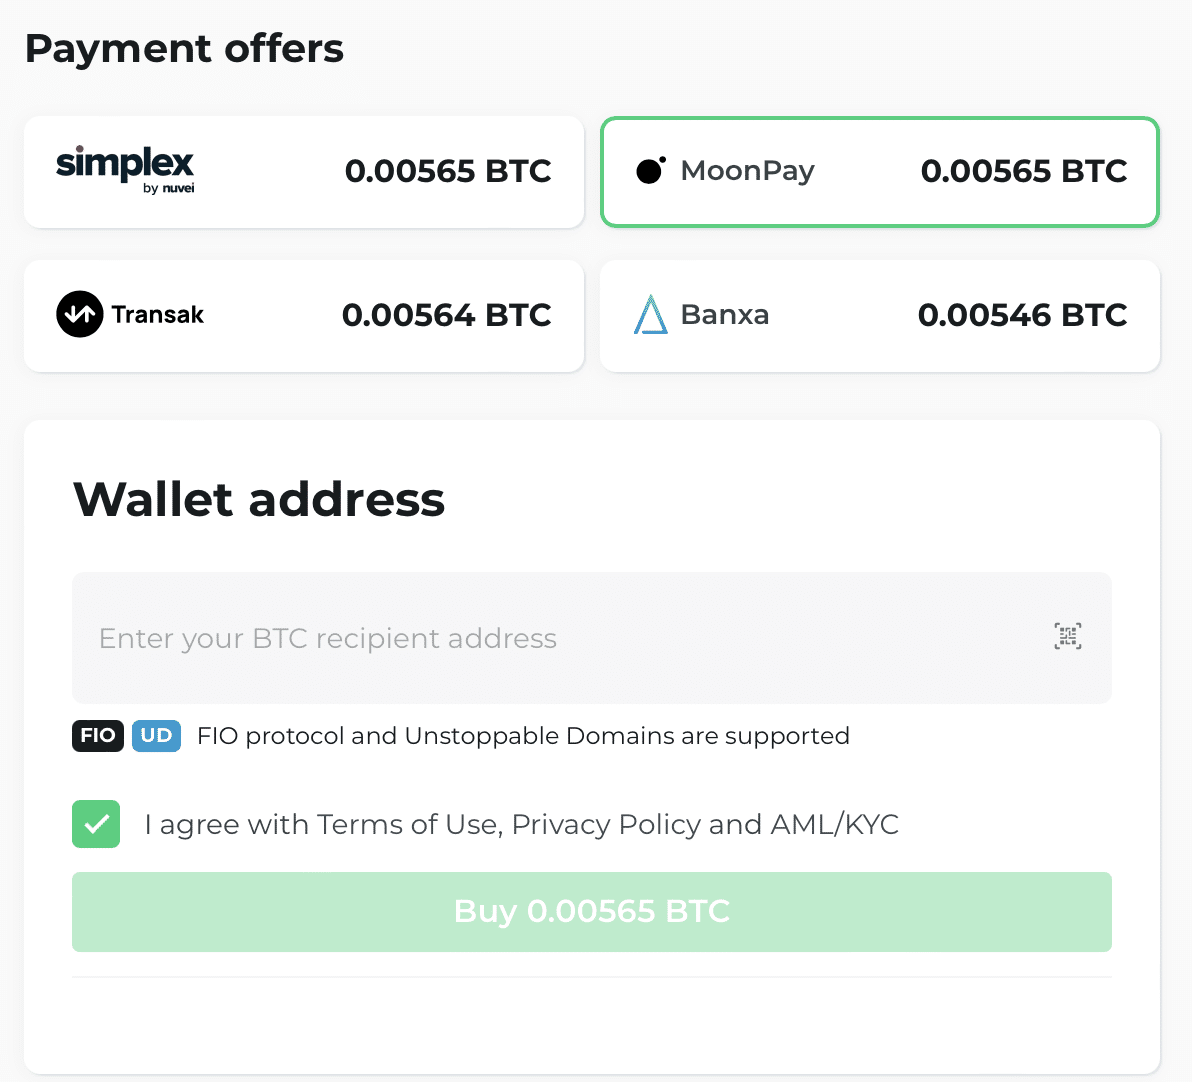 Payment offers the wallet address field